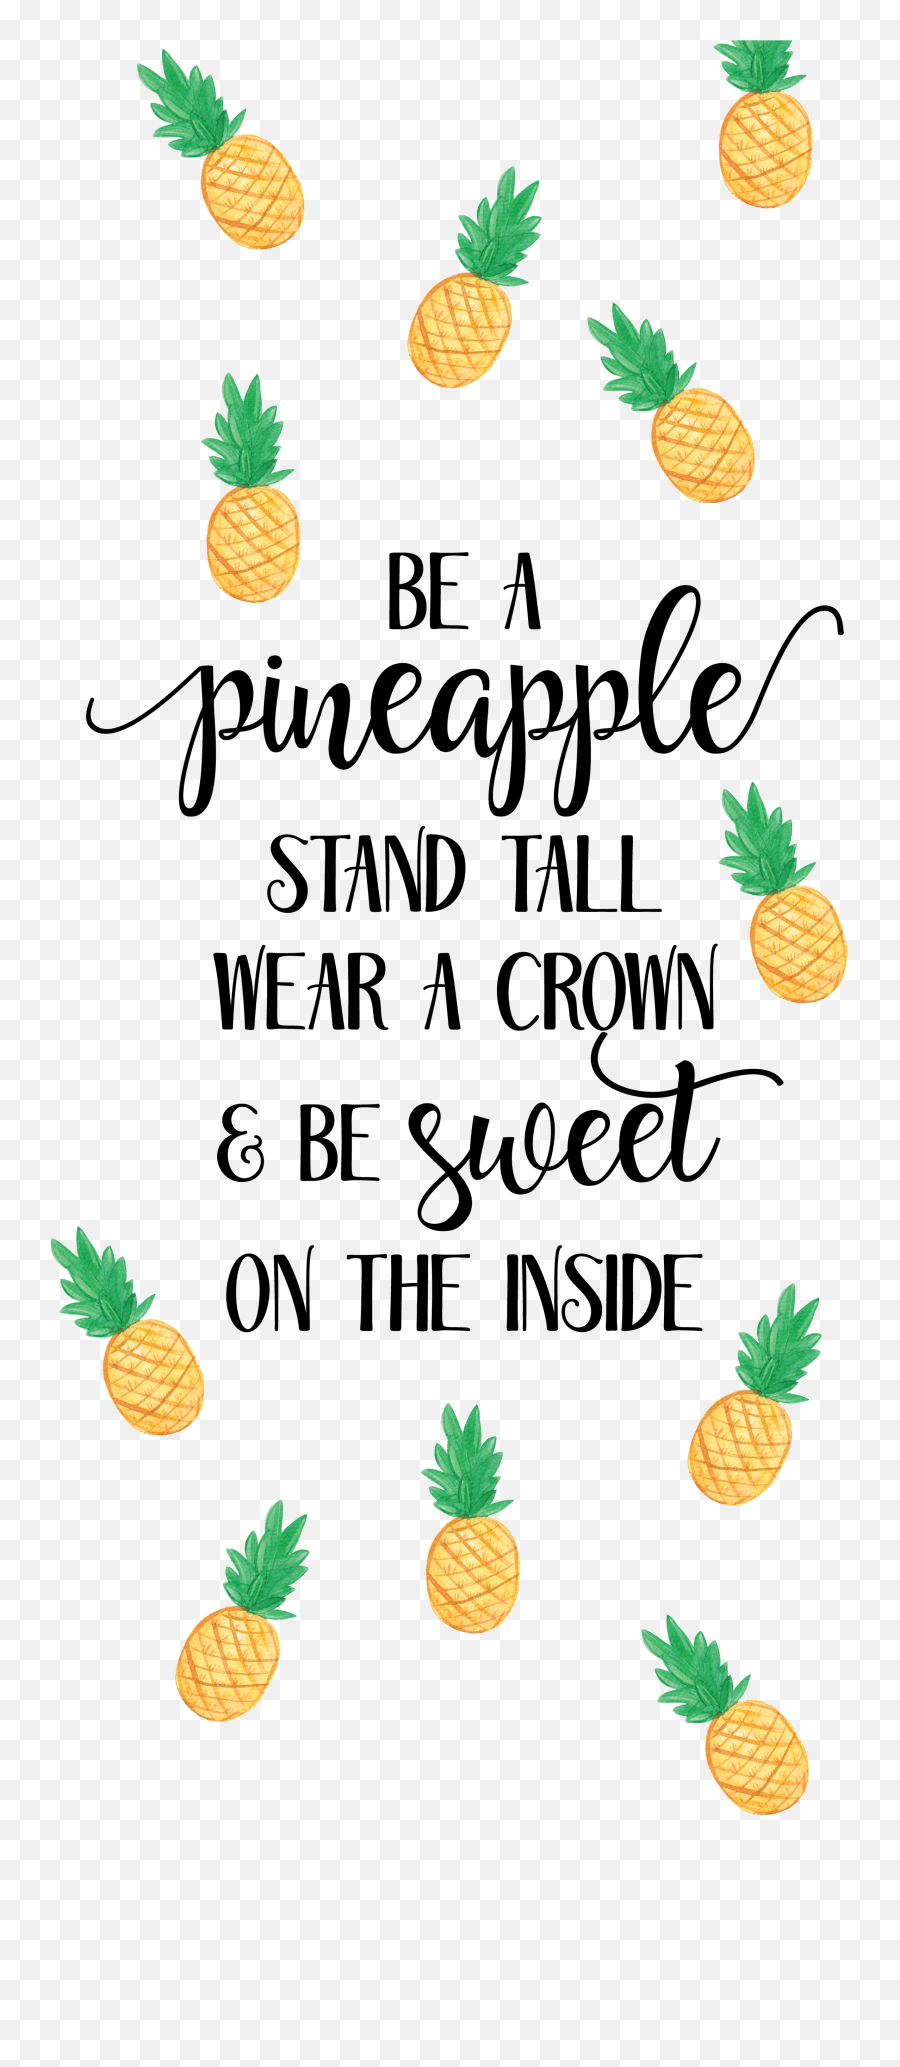 Pineapple Wallpaper Hd Wallpapers - Pineapple Wallpaper Quotes Png,Png Wallpapers